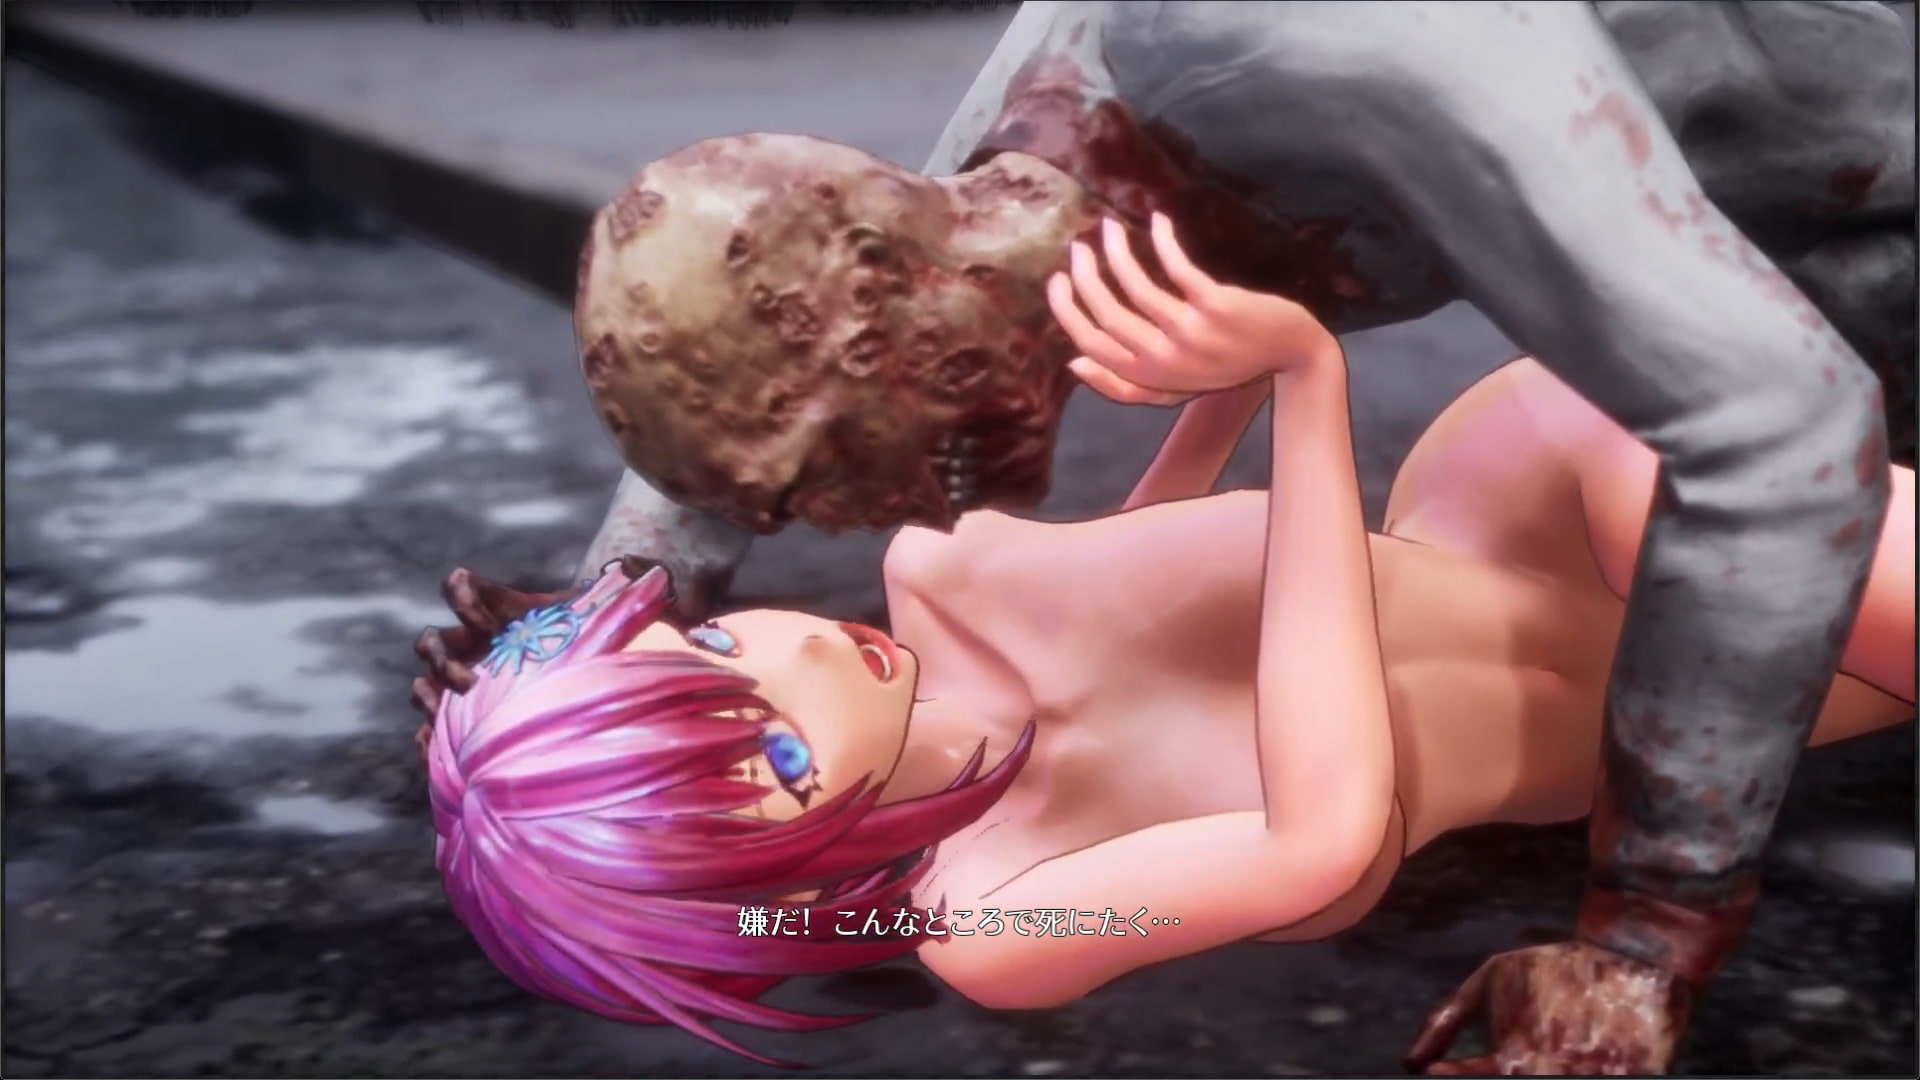 Seed of the Dead: Sweet Home Brings Back the Sex & Zombie-Slaying.